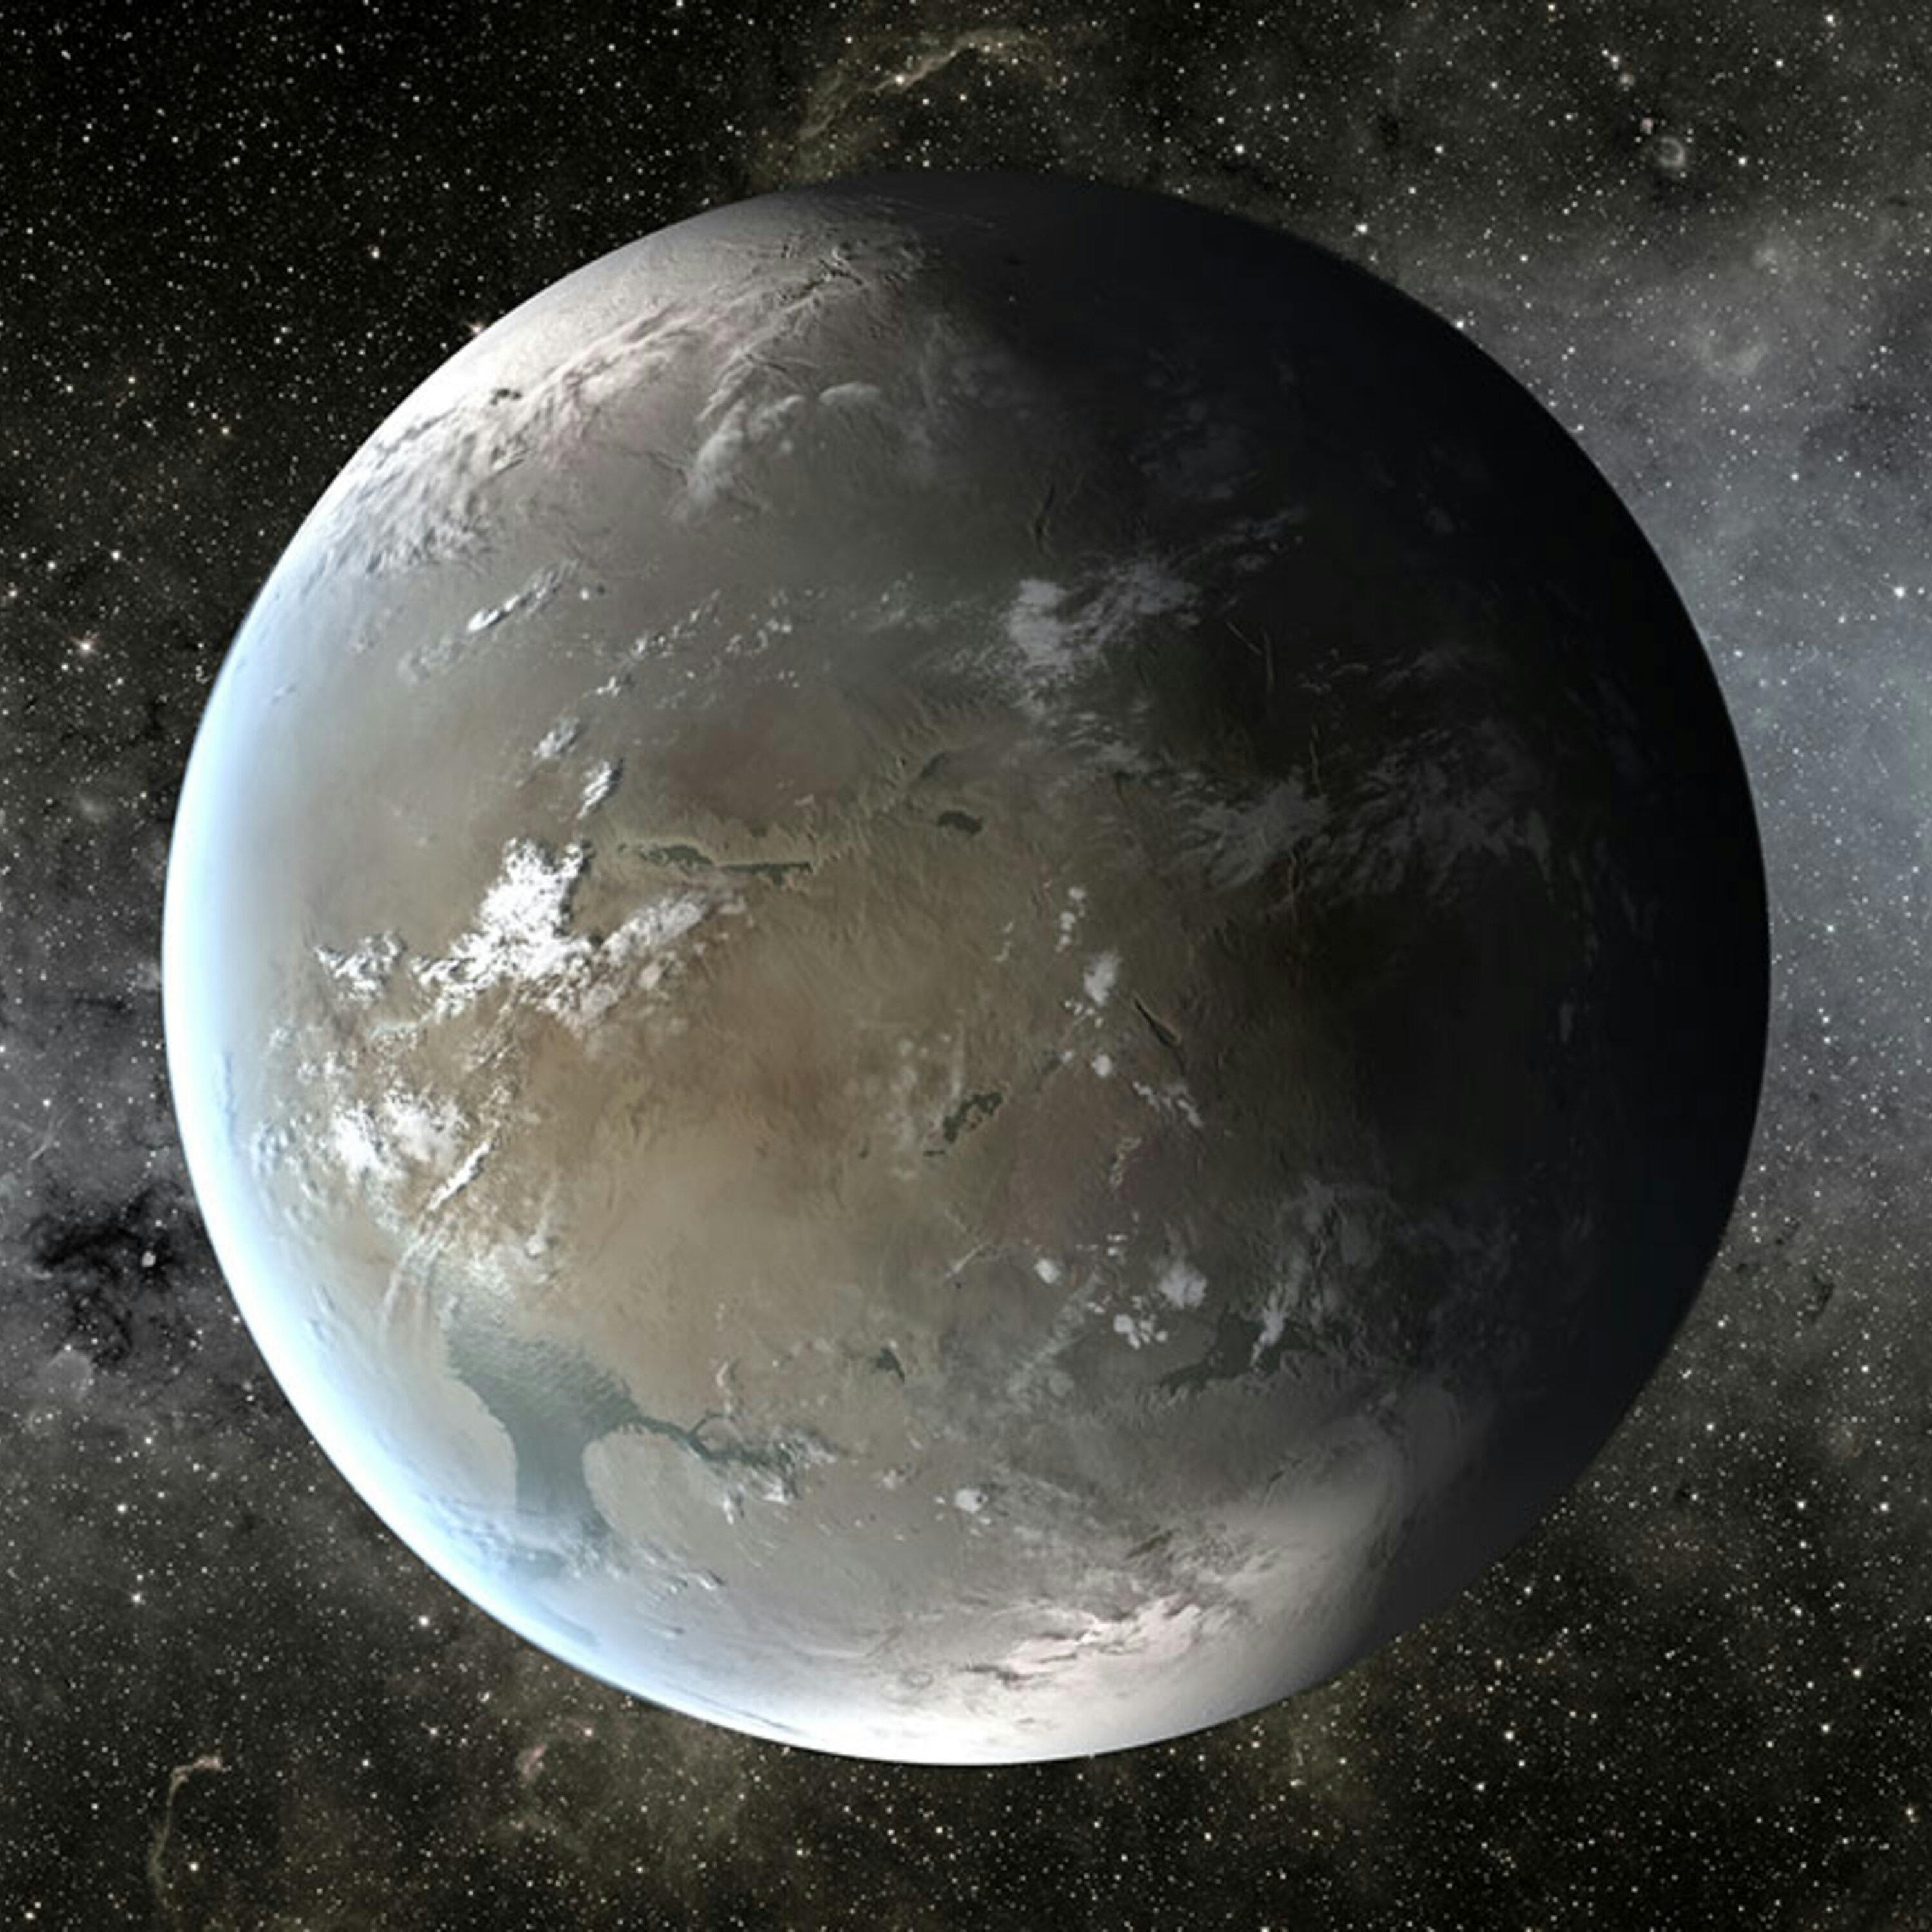 Peering beyond the haze of alien worlds, and how failures help us make new discoveries